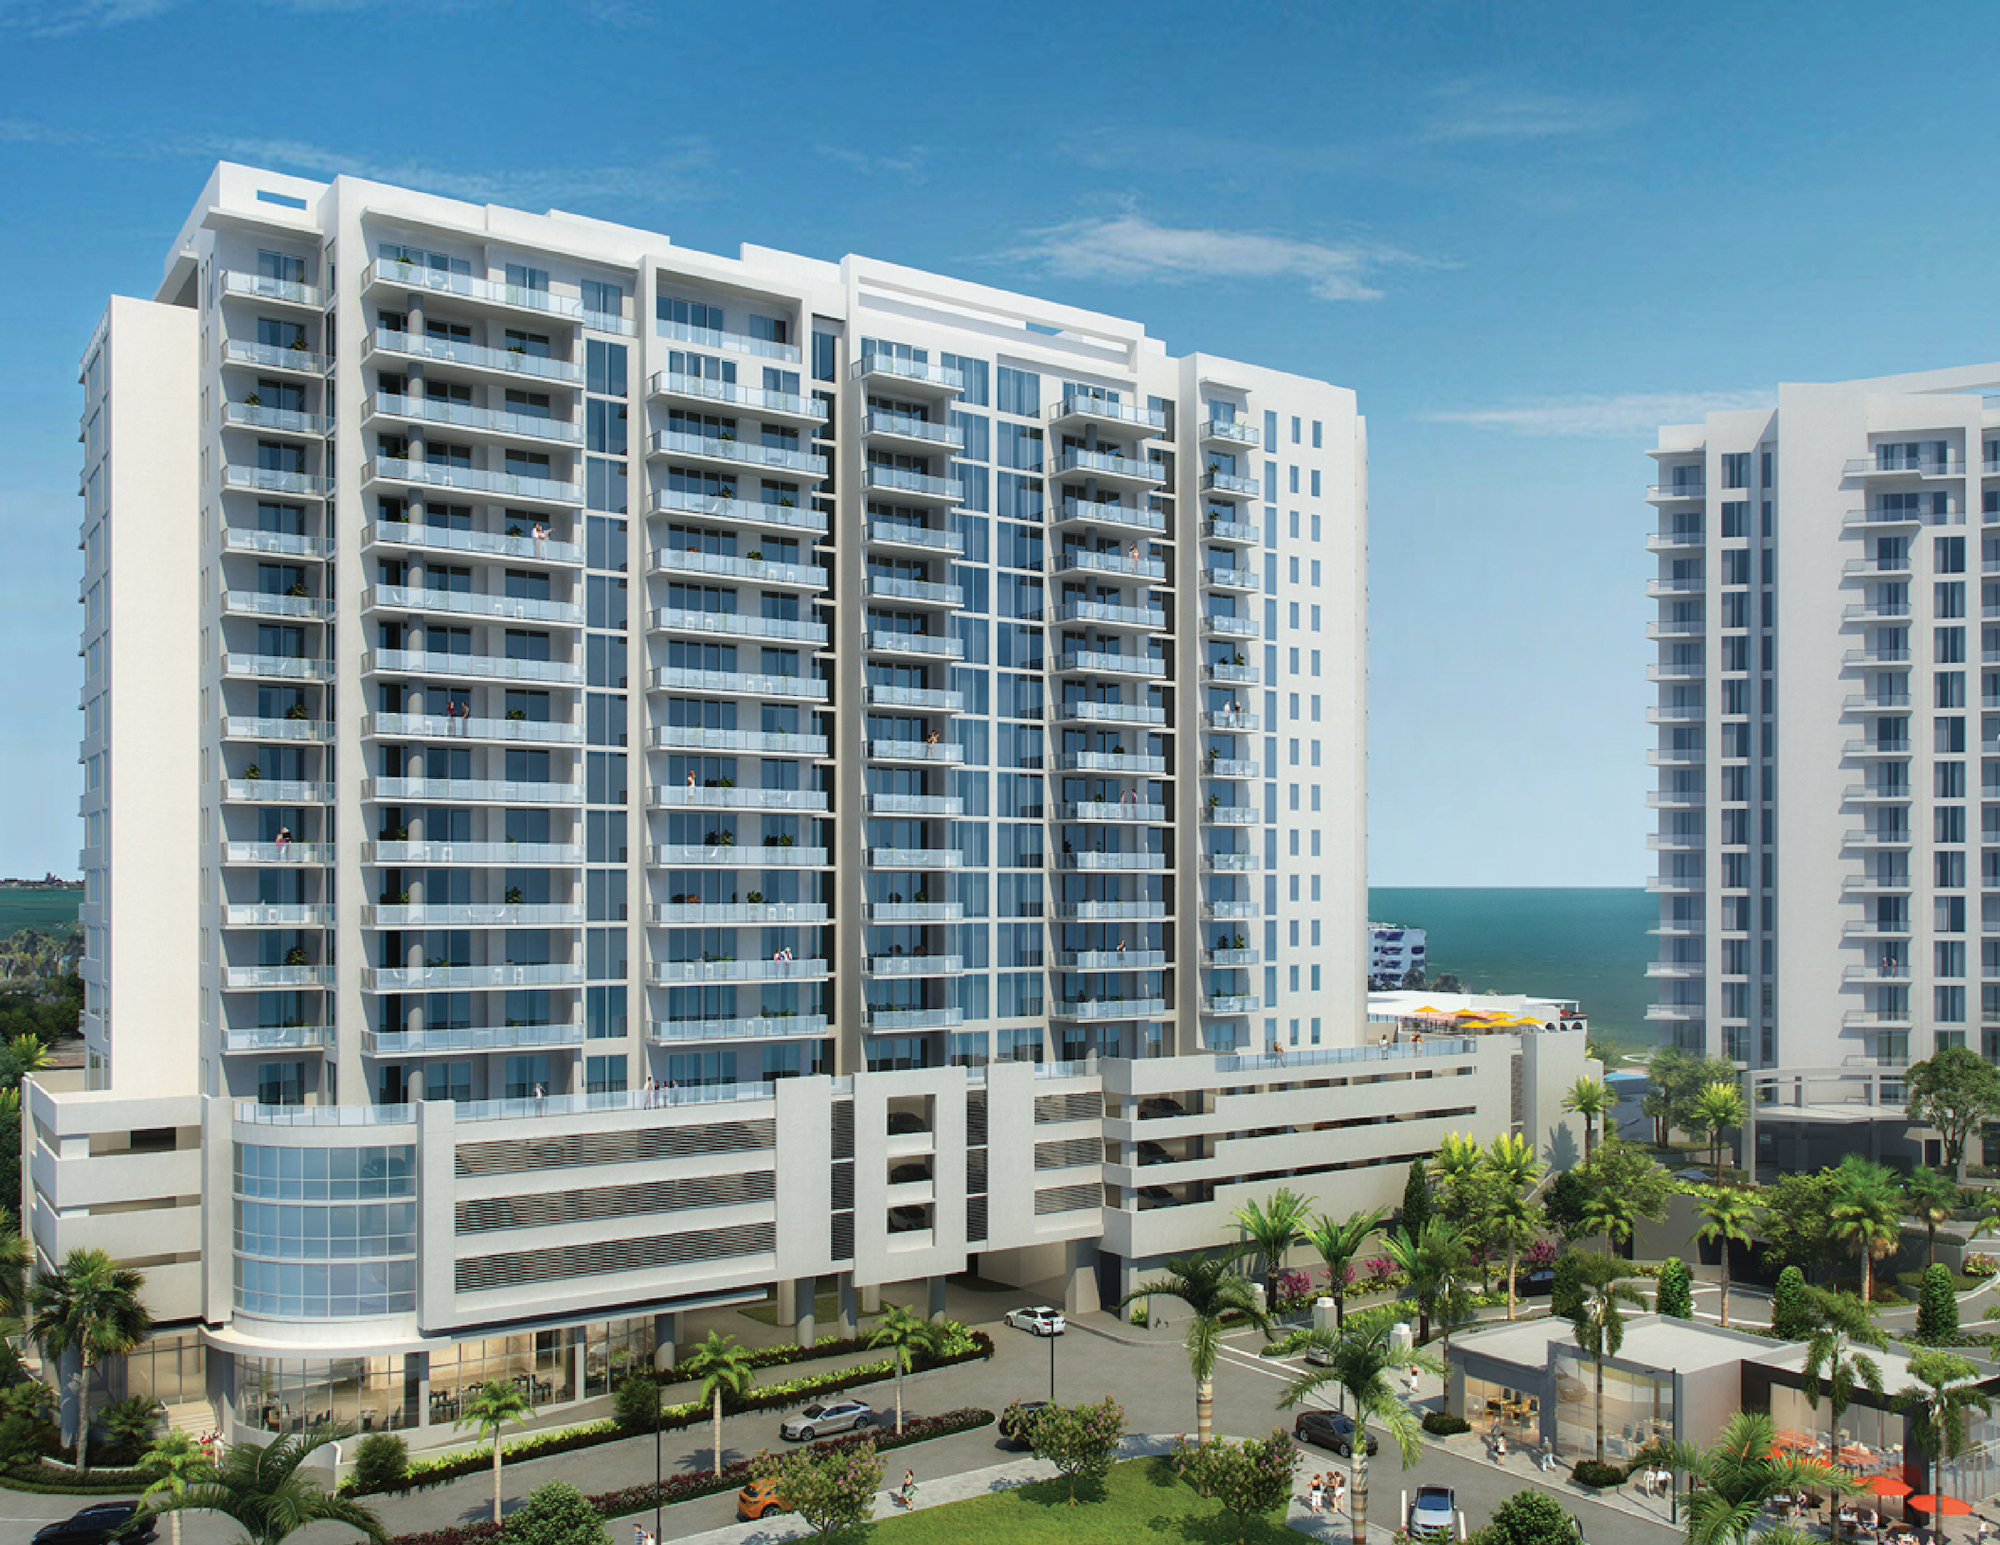 COURTESY RENDERING — Kolter Group plans to star construction on Bayso Sarasota, an 18-story condo project adjacent to the Ritz-Carlton Residences, later this year.